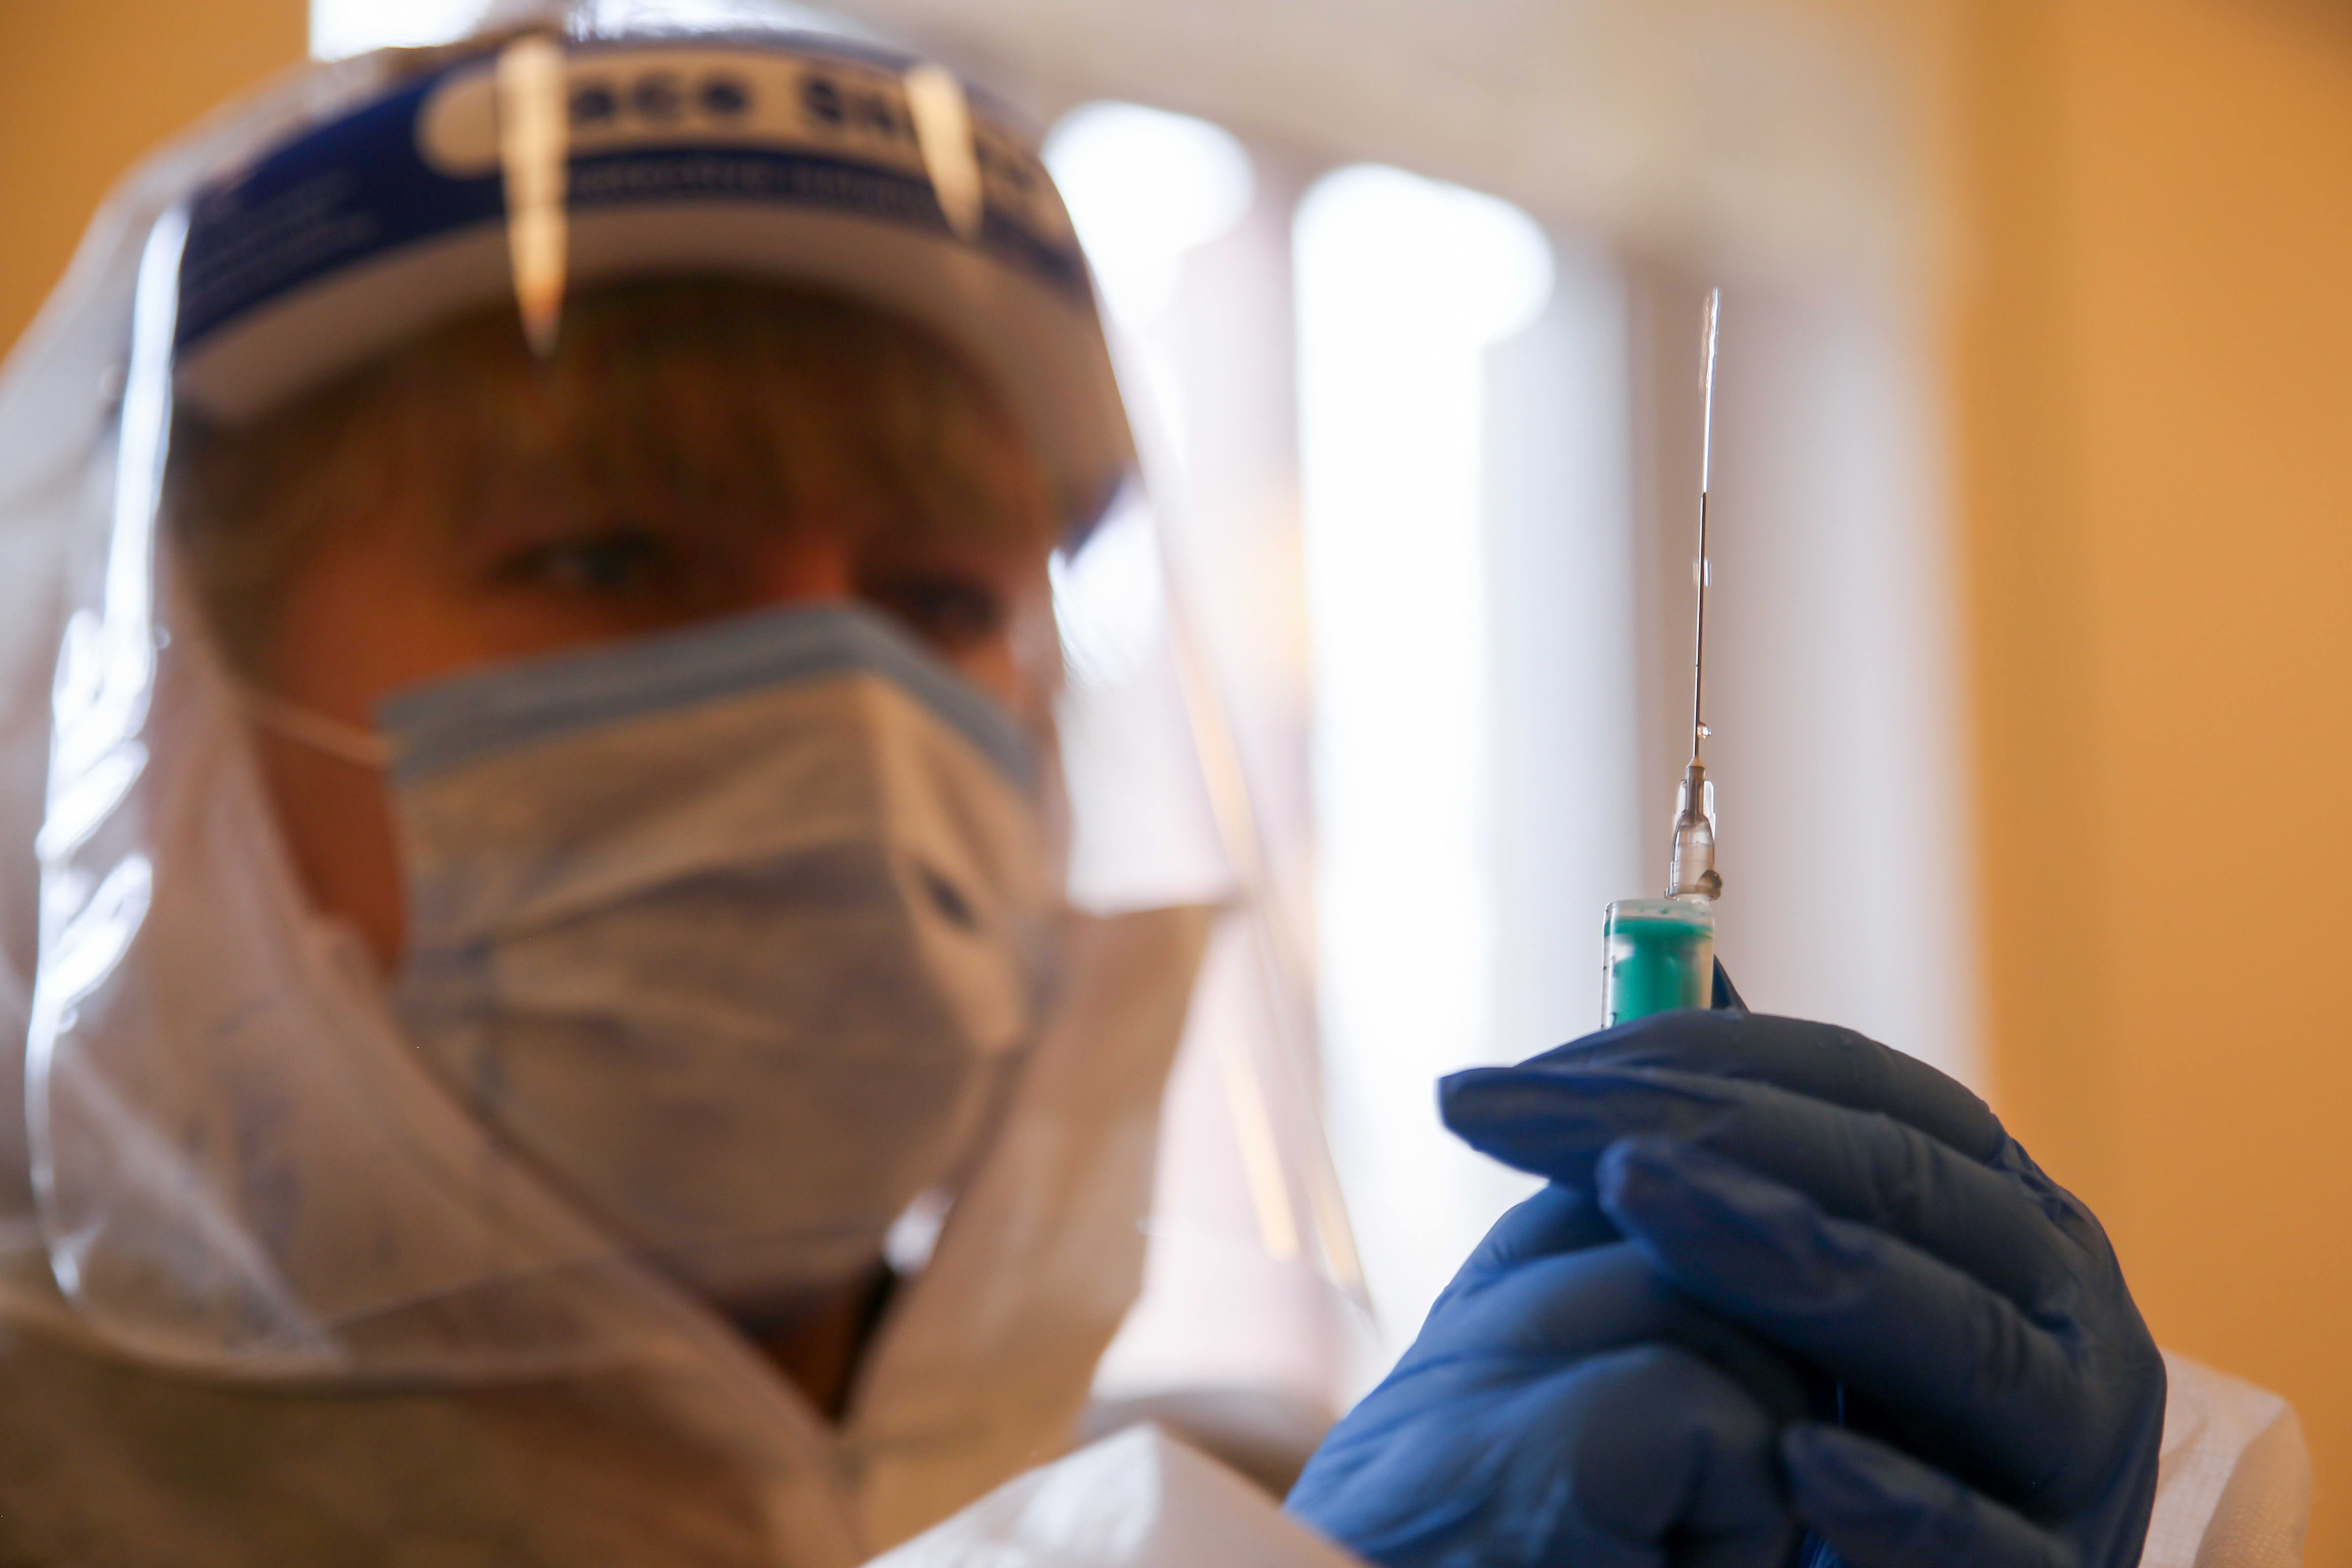 The Russian Sputnik vaccine is attracting Eastern Europe, worrying the EU